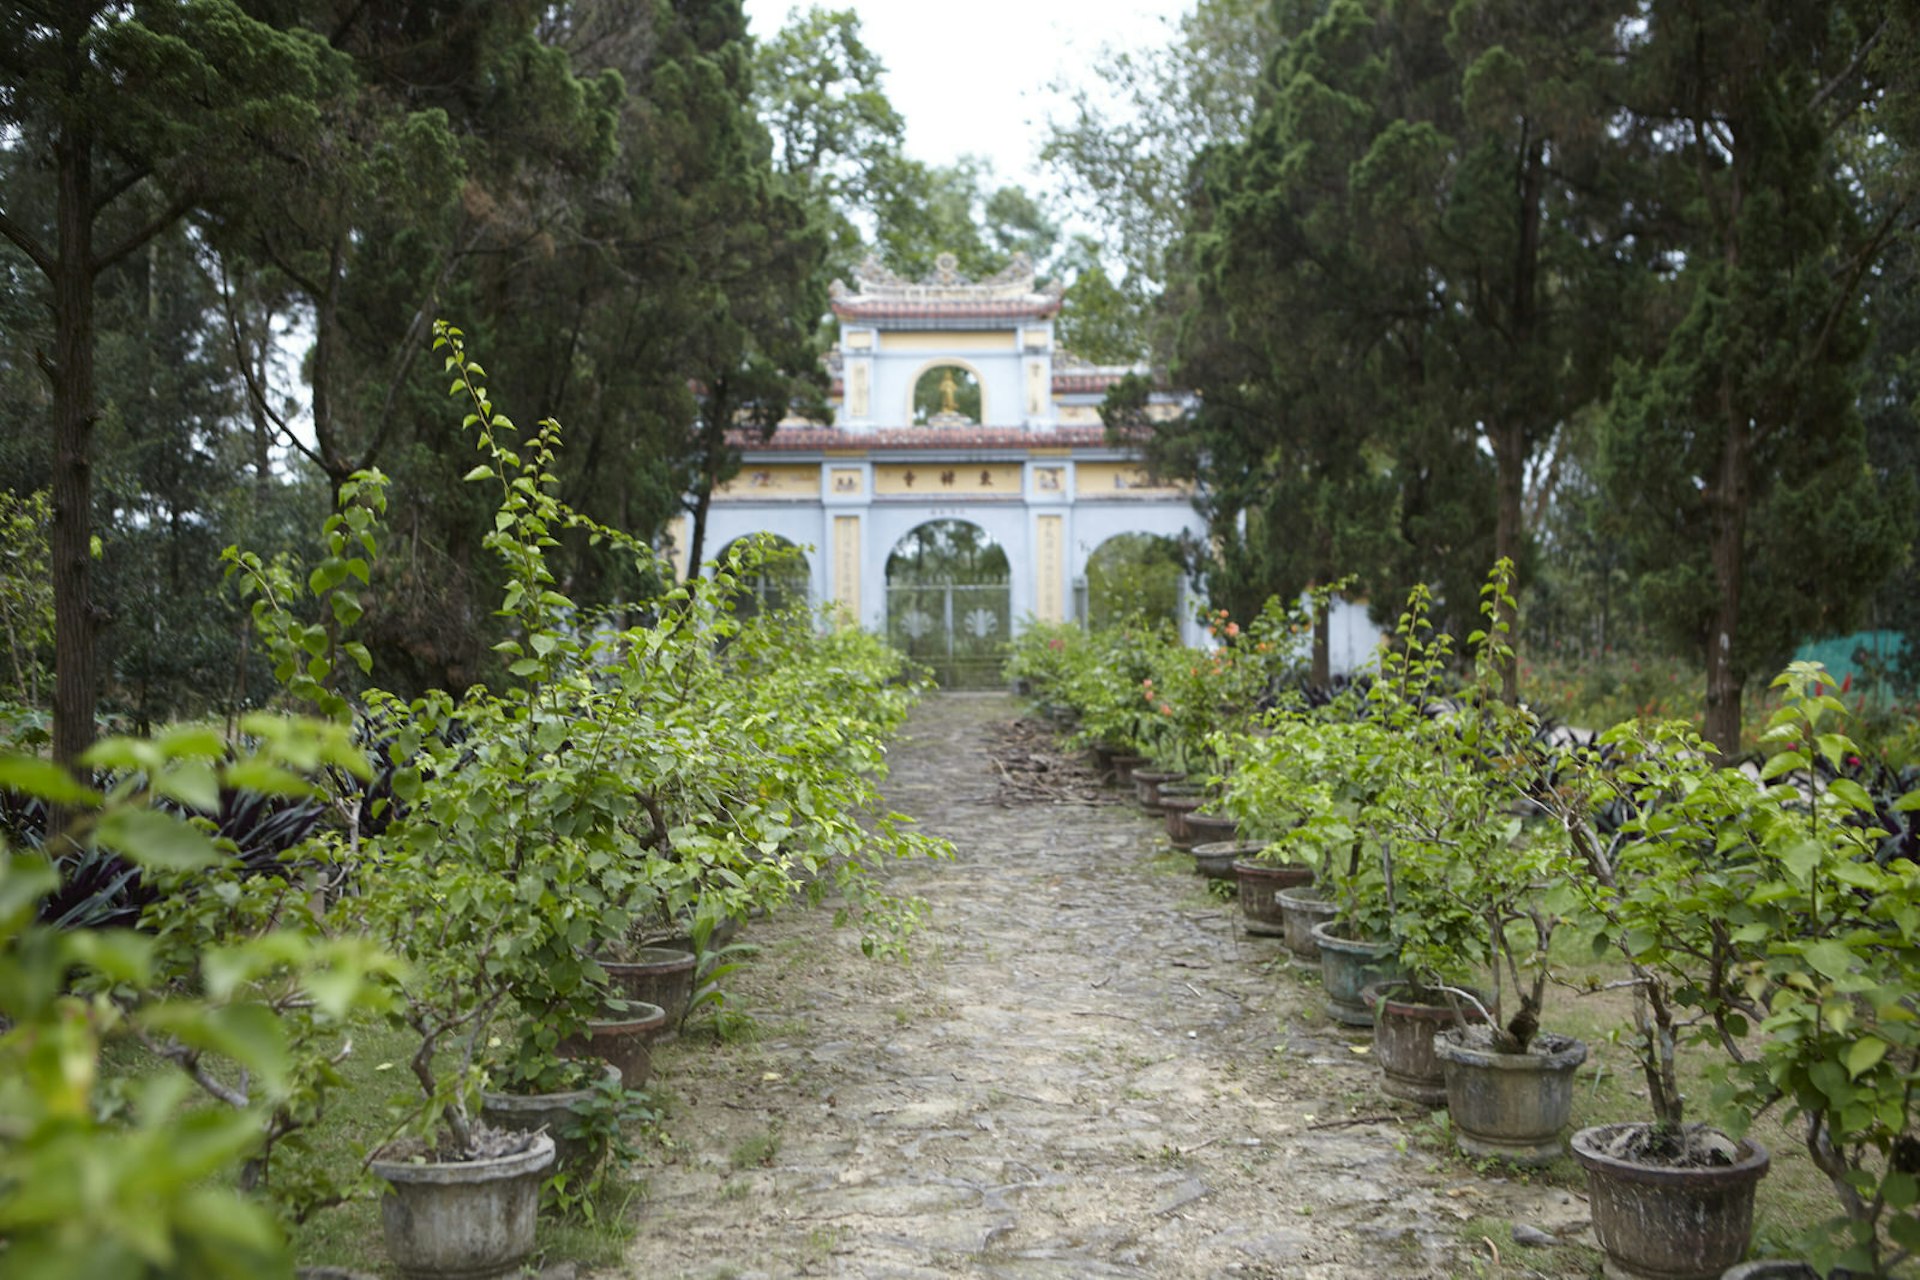 The calm gardens of Hue's 200-year-old Dong Thuyen Convent © Matt Munro / Lonely Planet